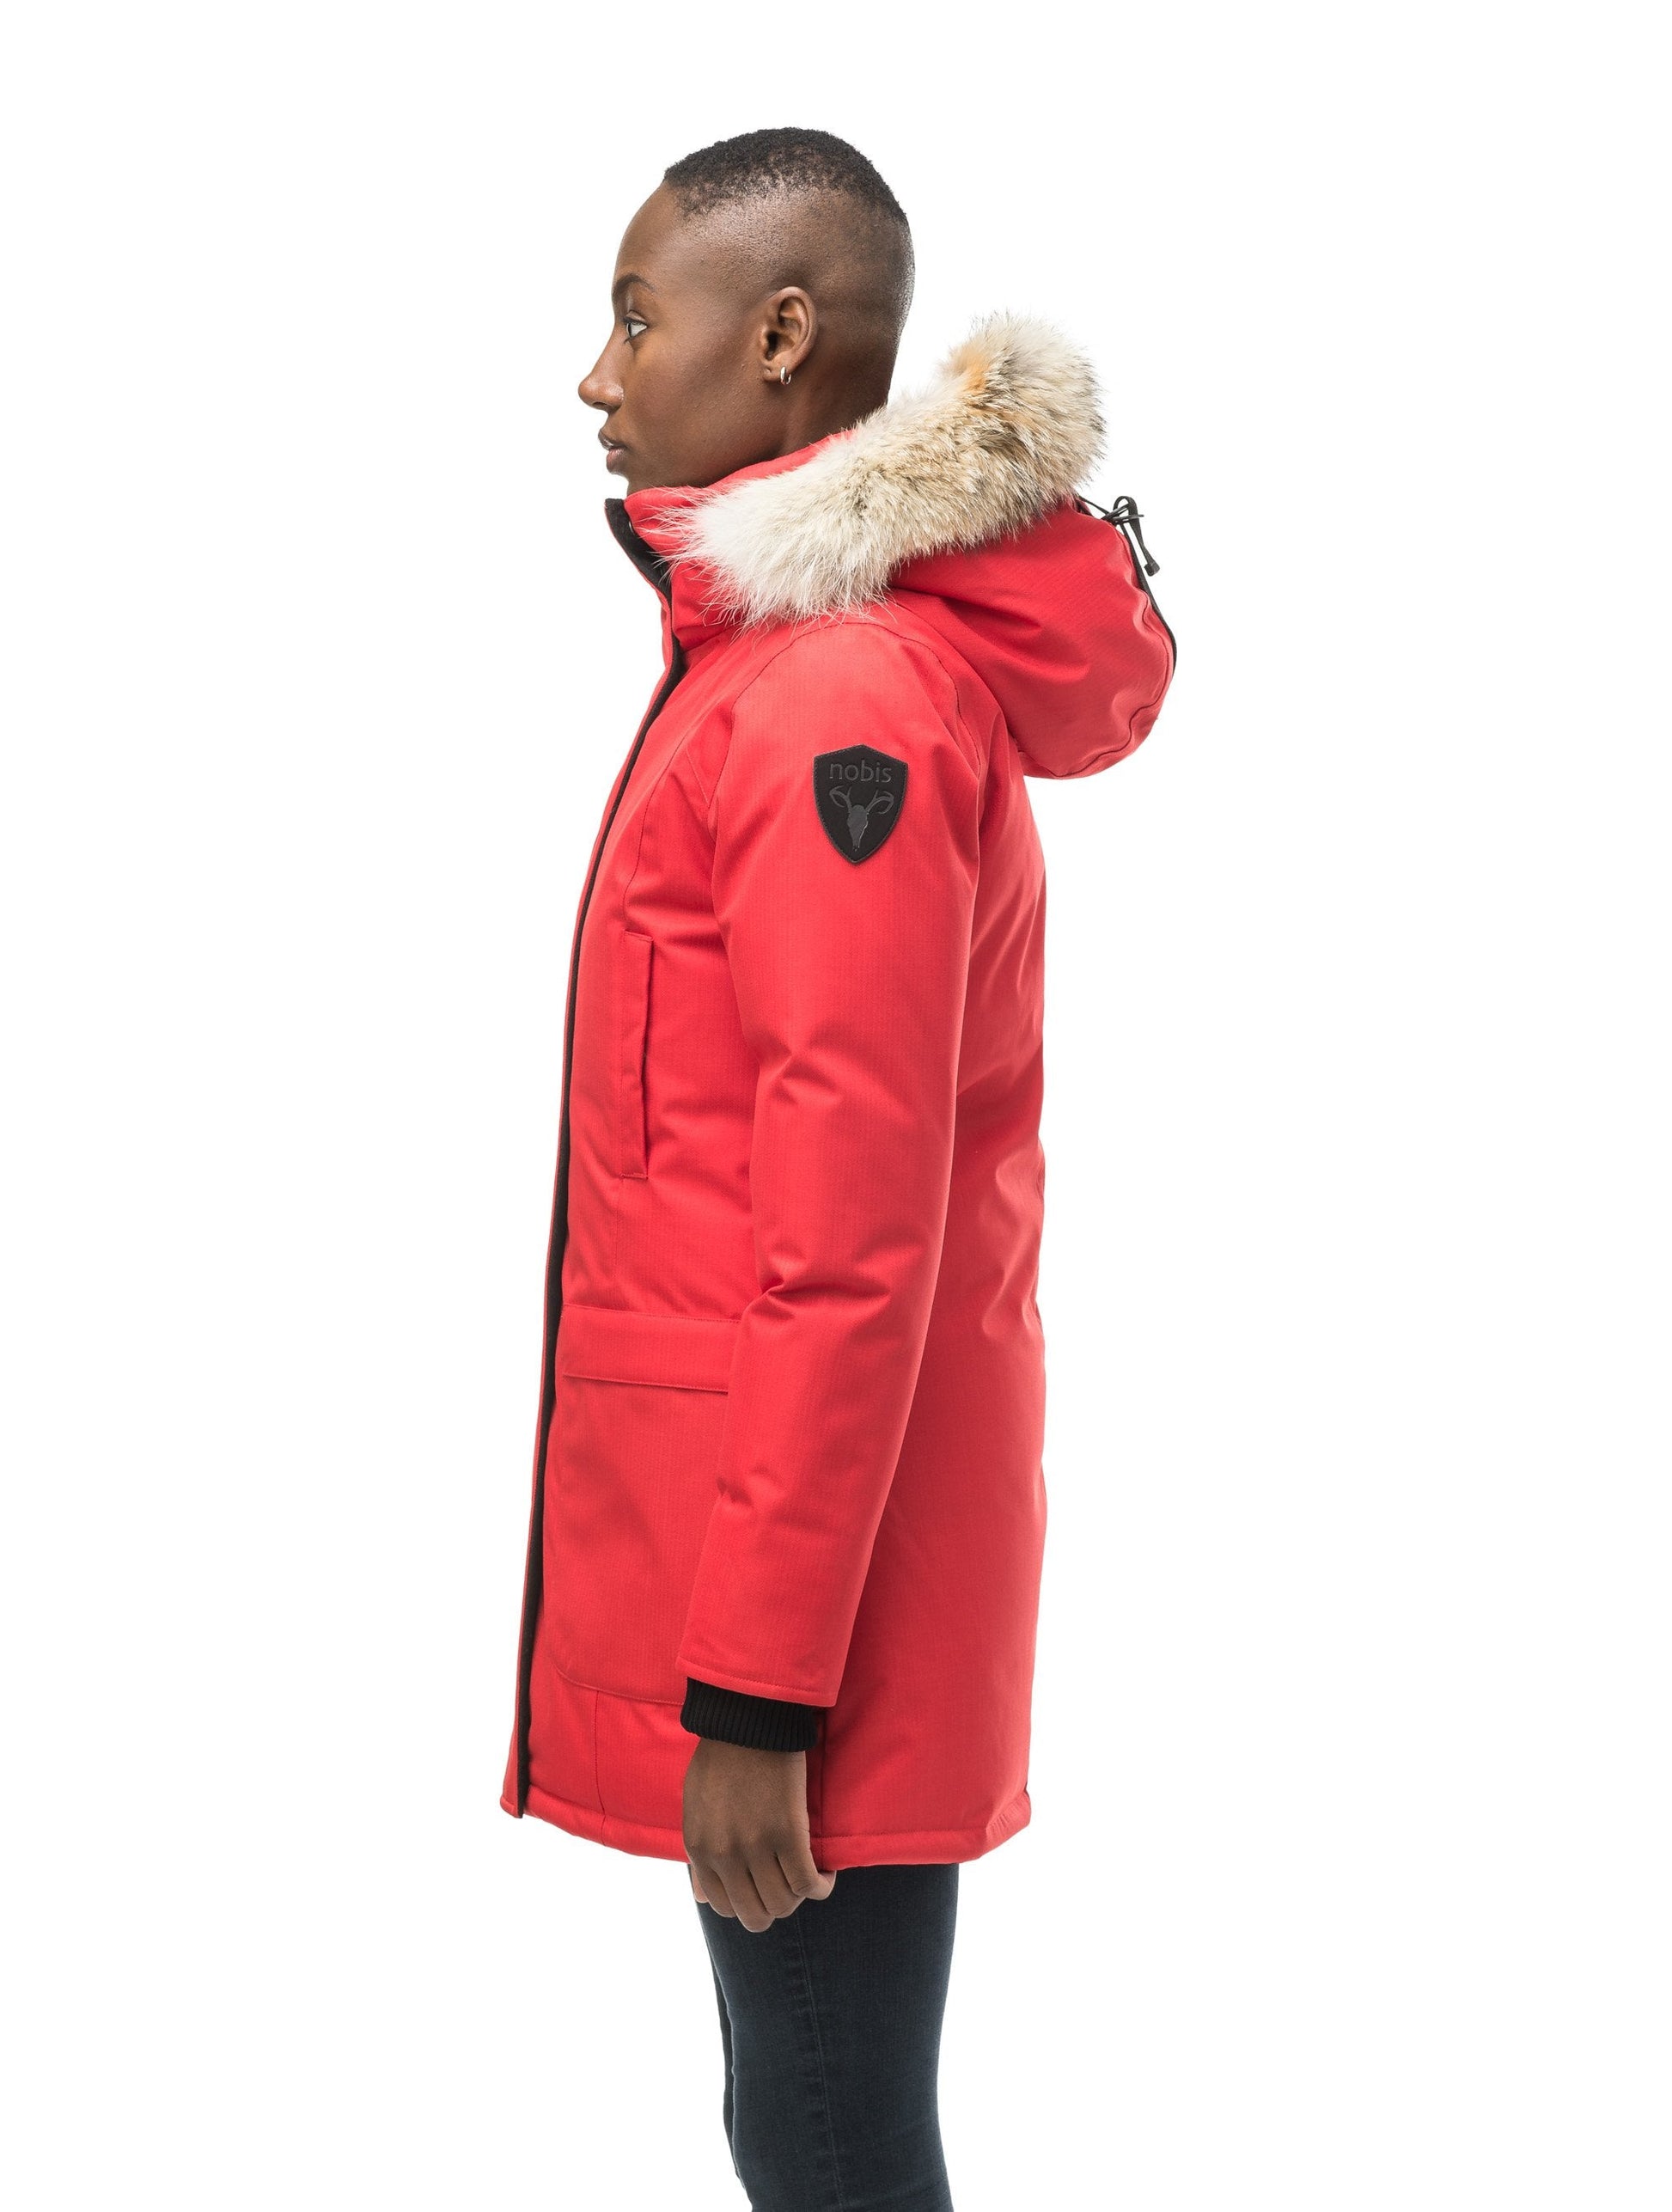 Women's down filled parka that sits just below the hip with a clean look and two hip patch pockets in CH Red